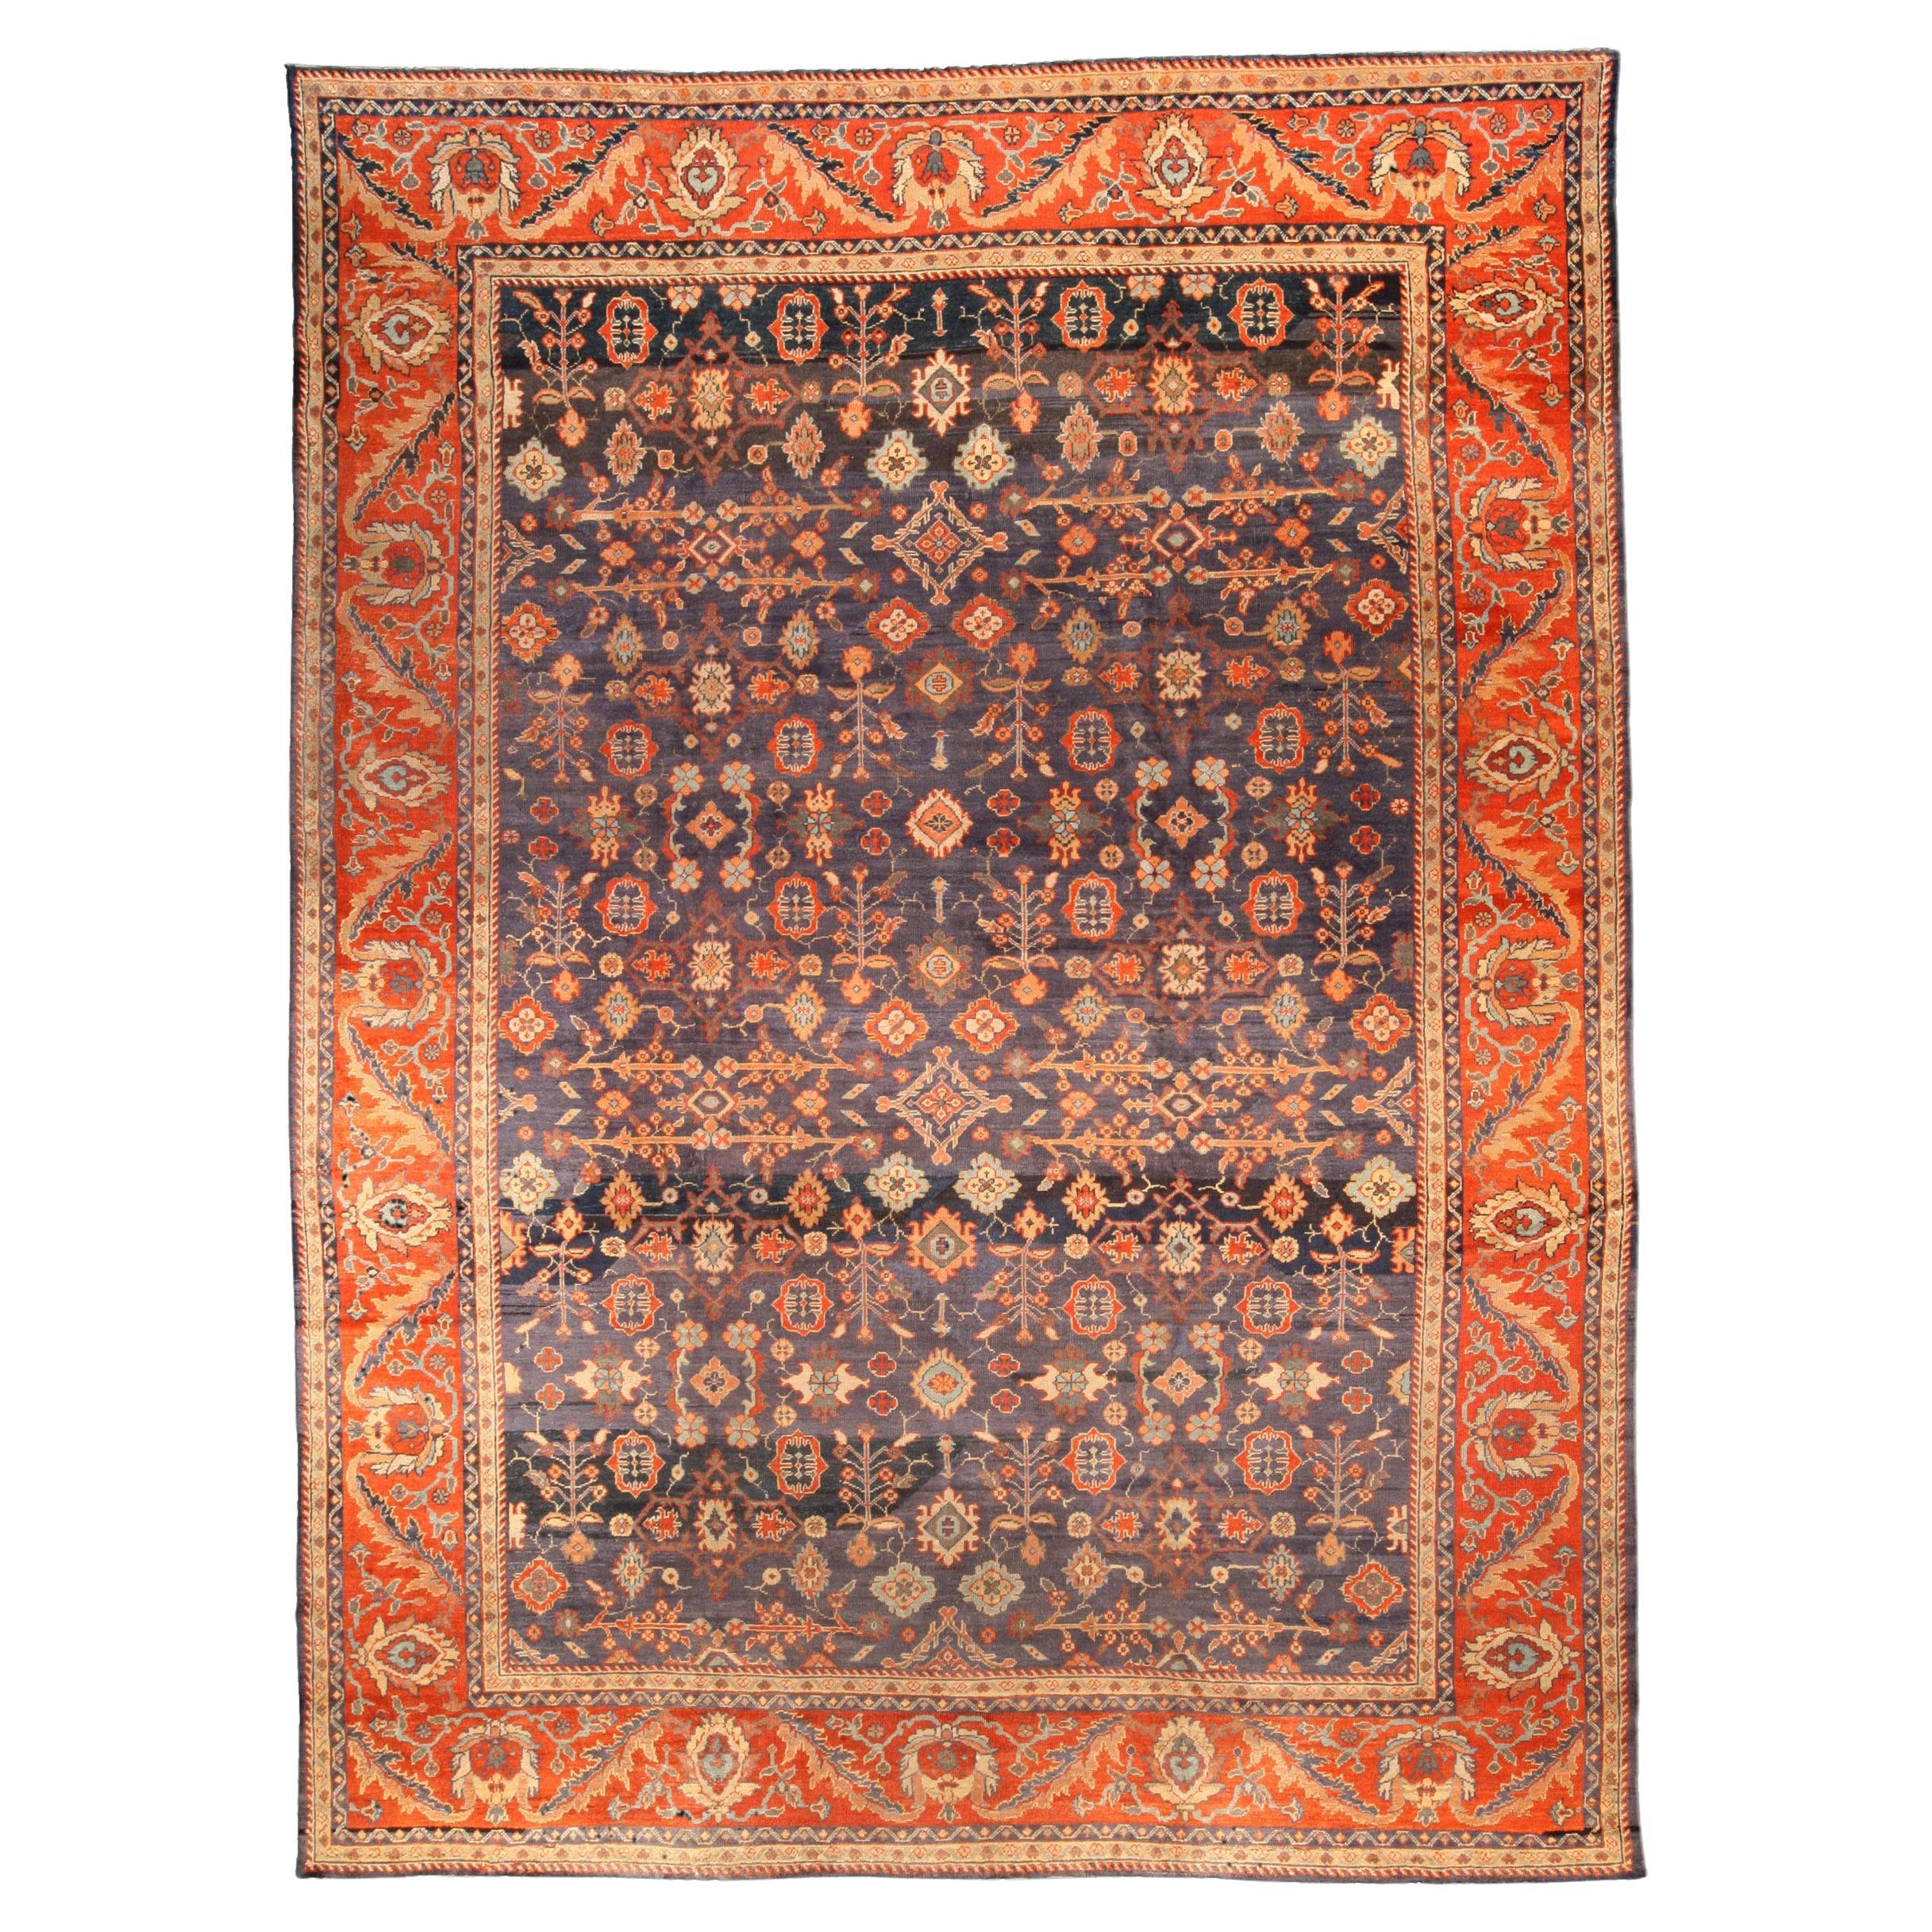 Early 20th Century Persian Sultanabad Botanic Rug